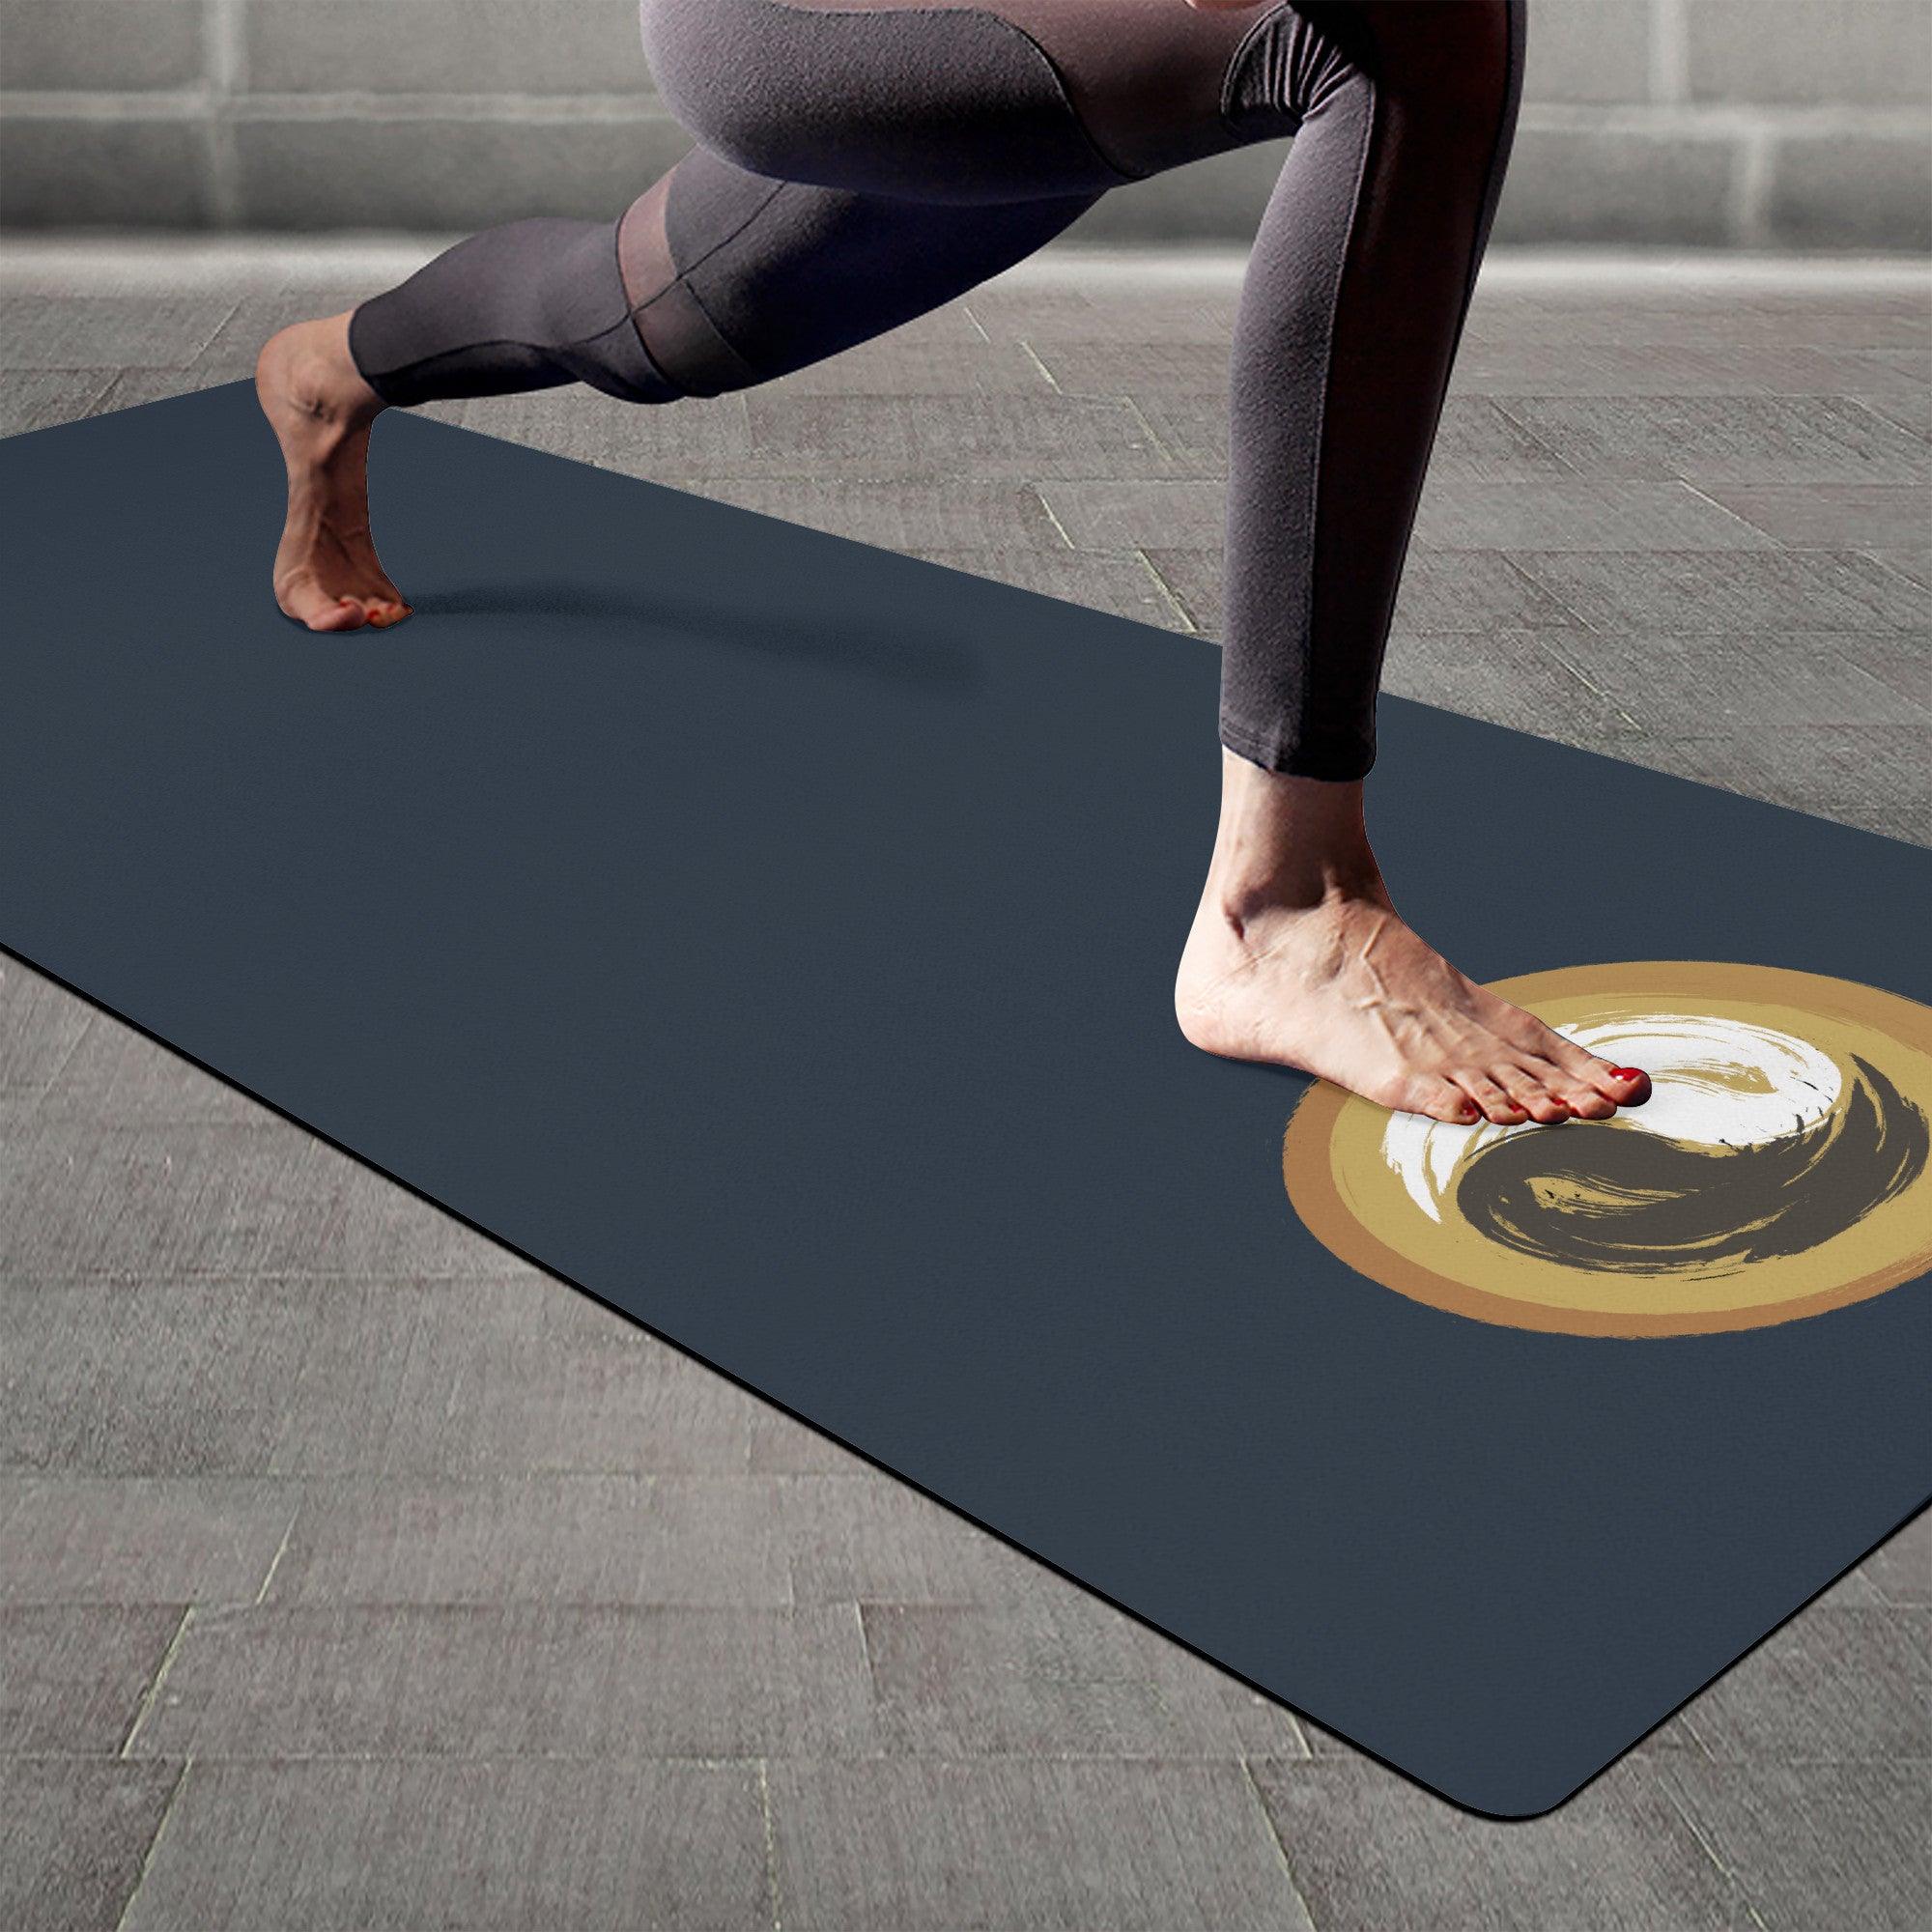 Rubber Yoga Mat - 3 mm fibers comfortable touch - Personal Hour Style - Personal Hour for Yoga and Meditations 